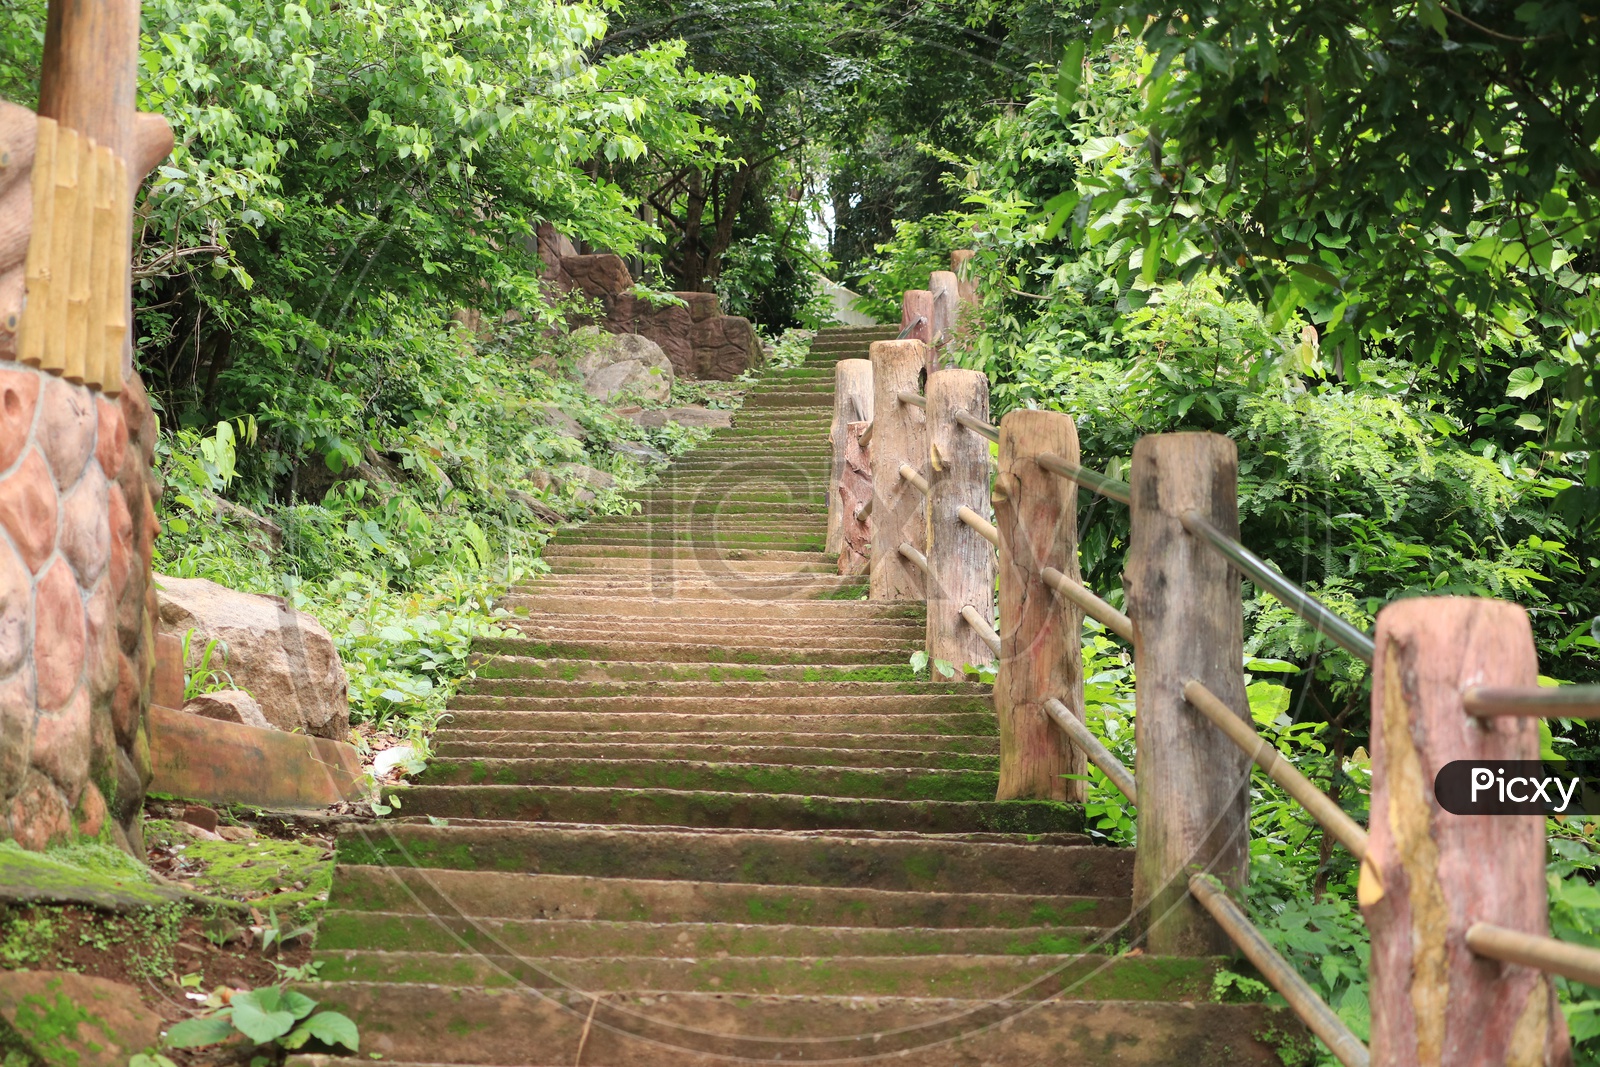 Leading steps in the forest